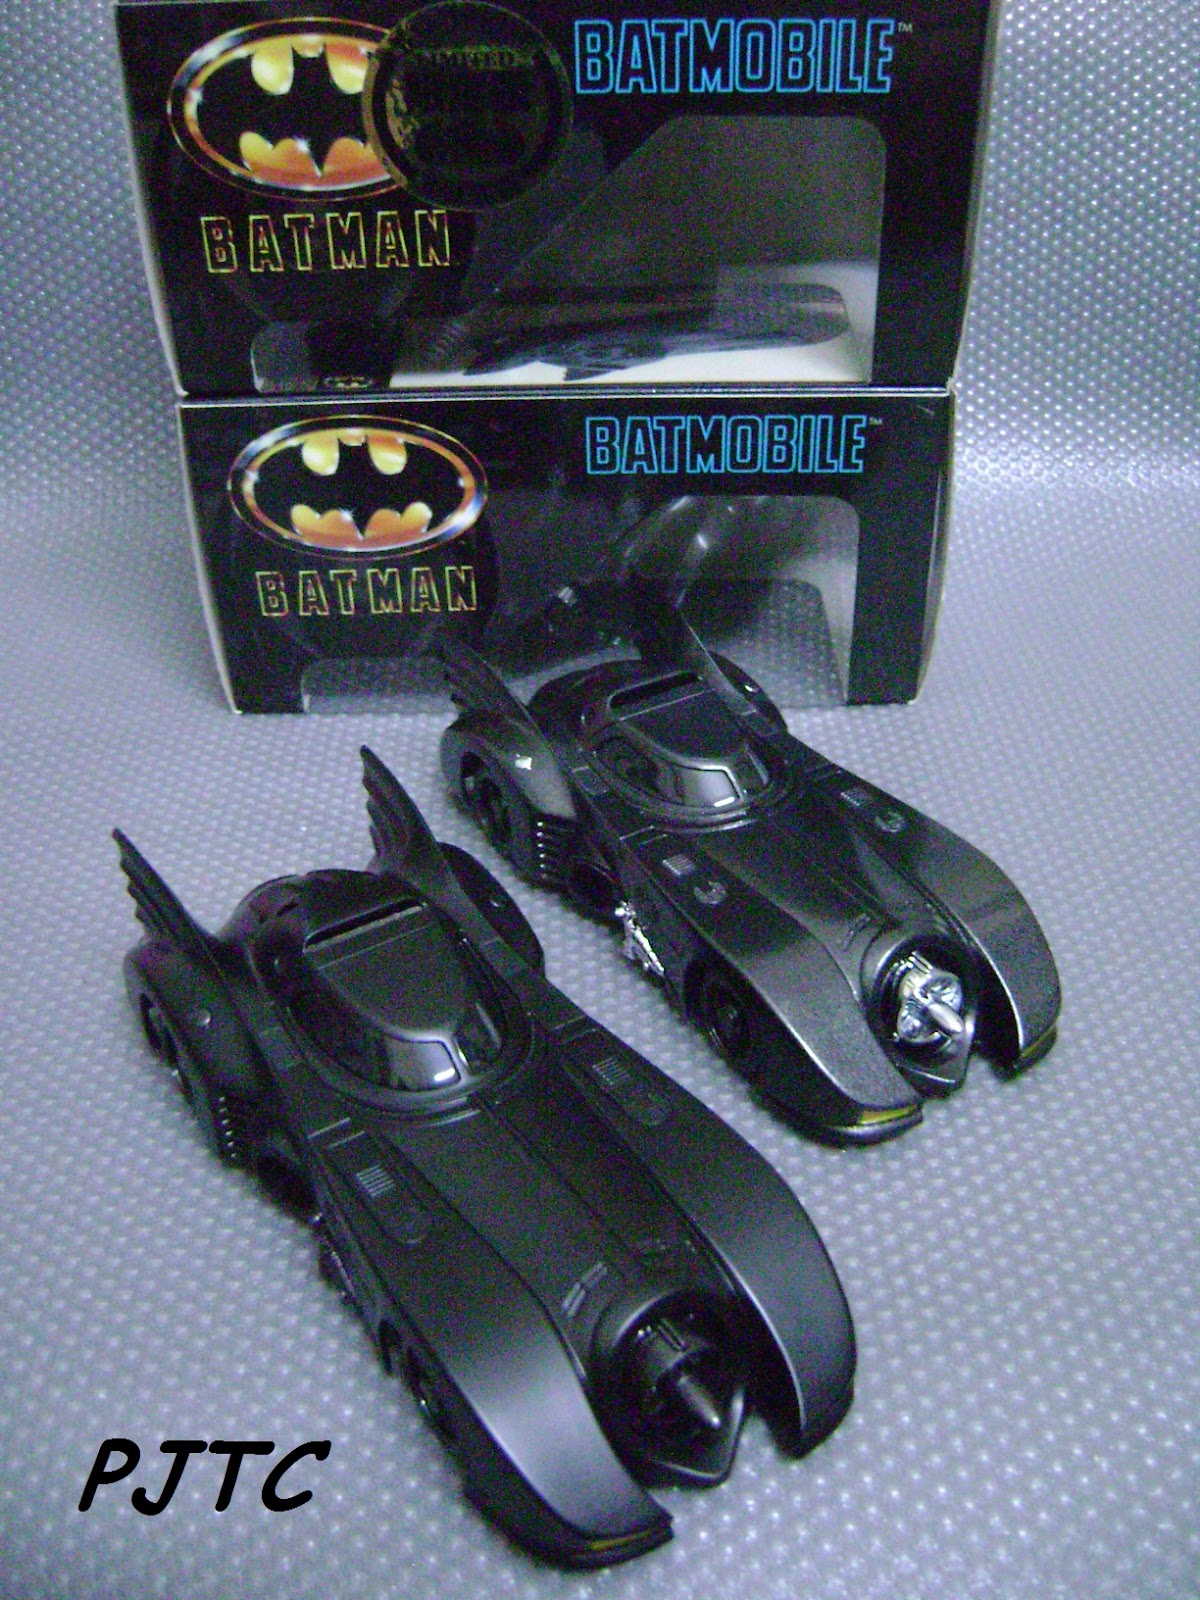 PJ Toy Car: Batmobile Made By Kyosho and Skynet